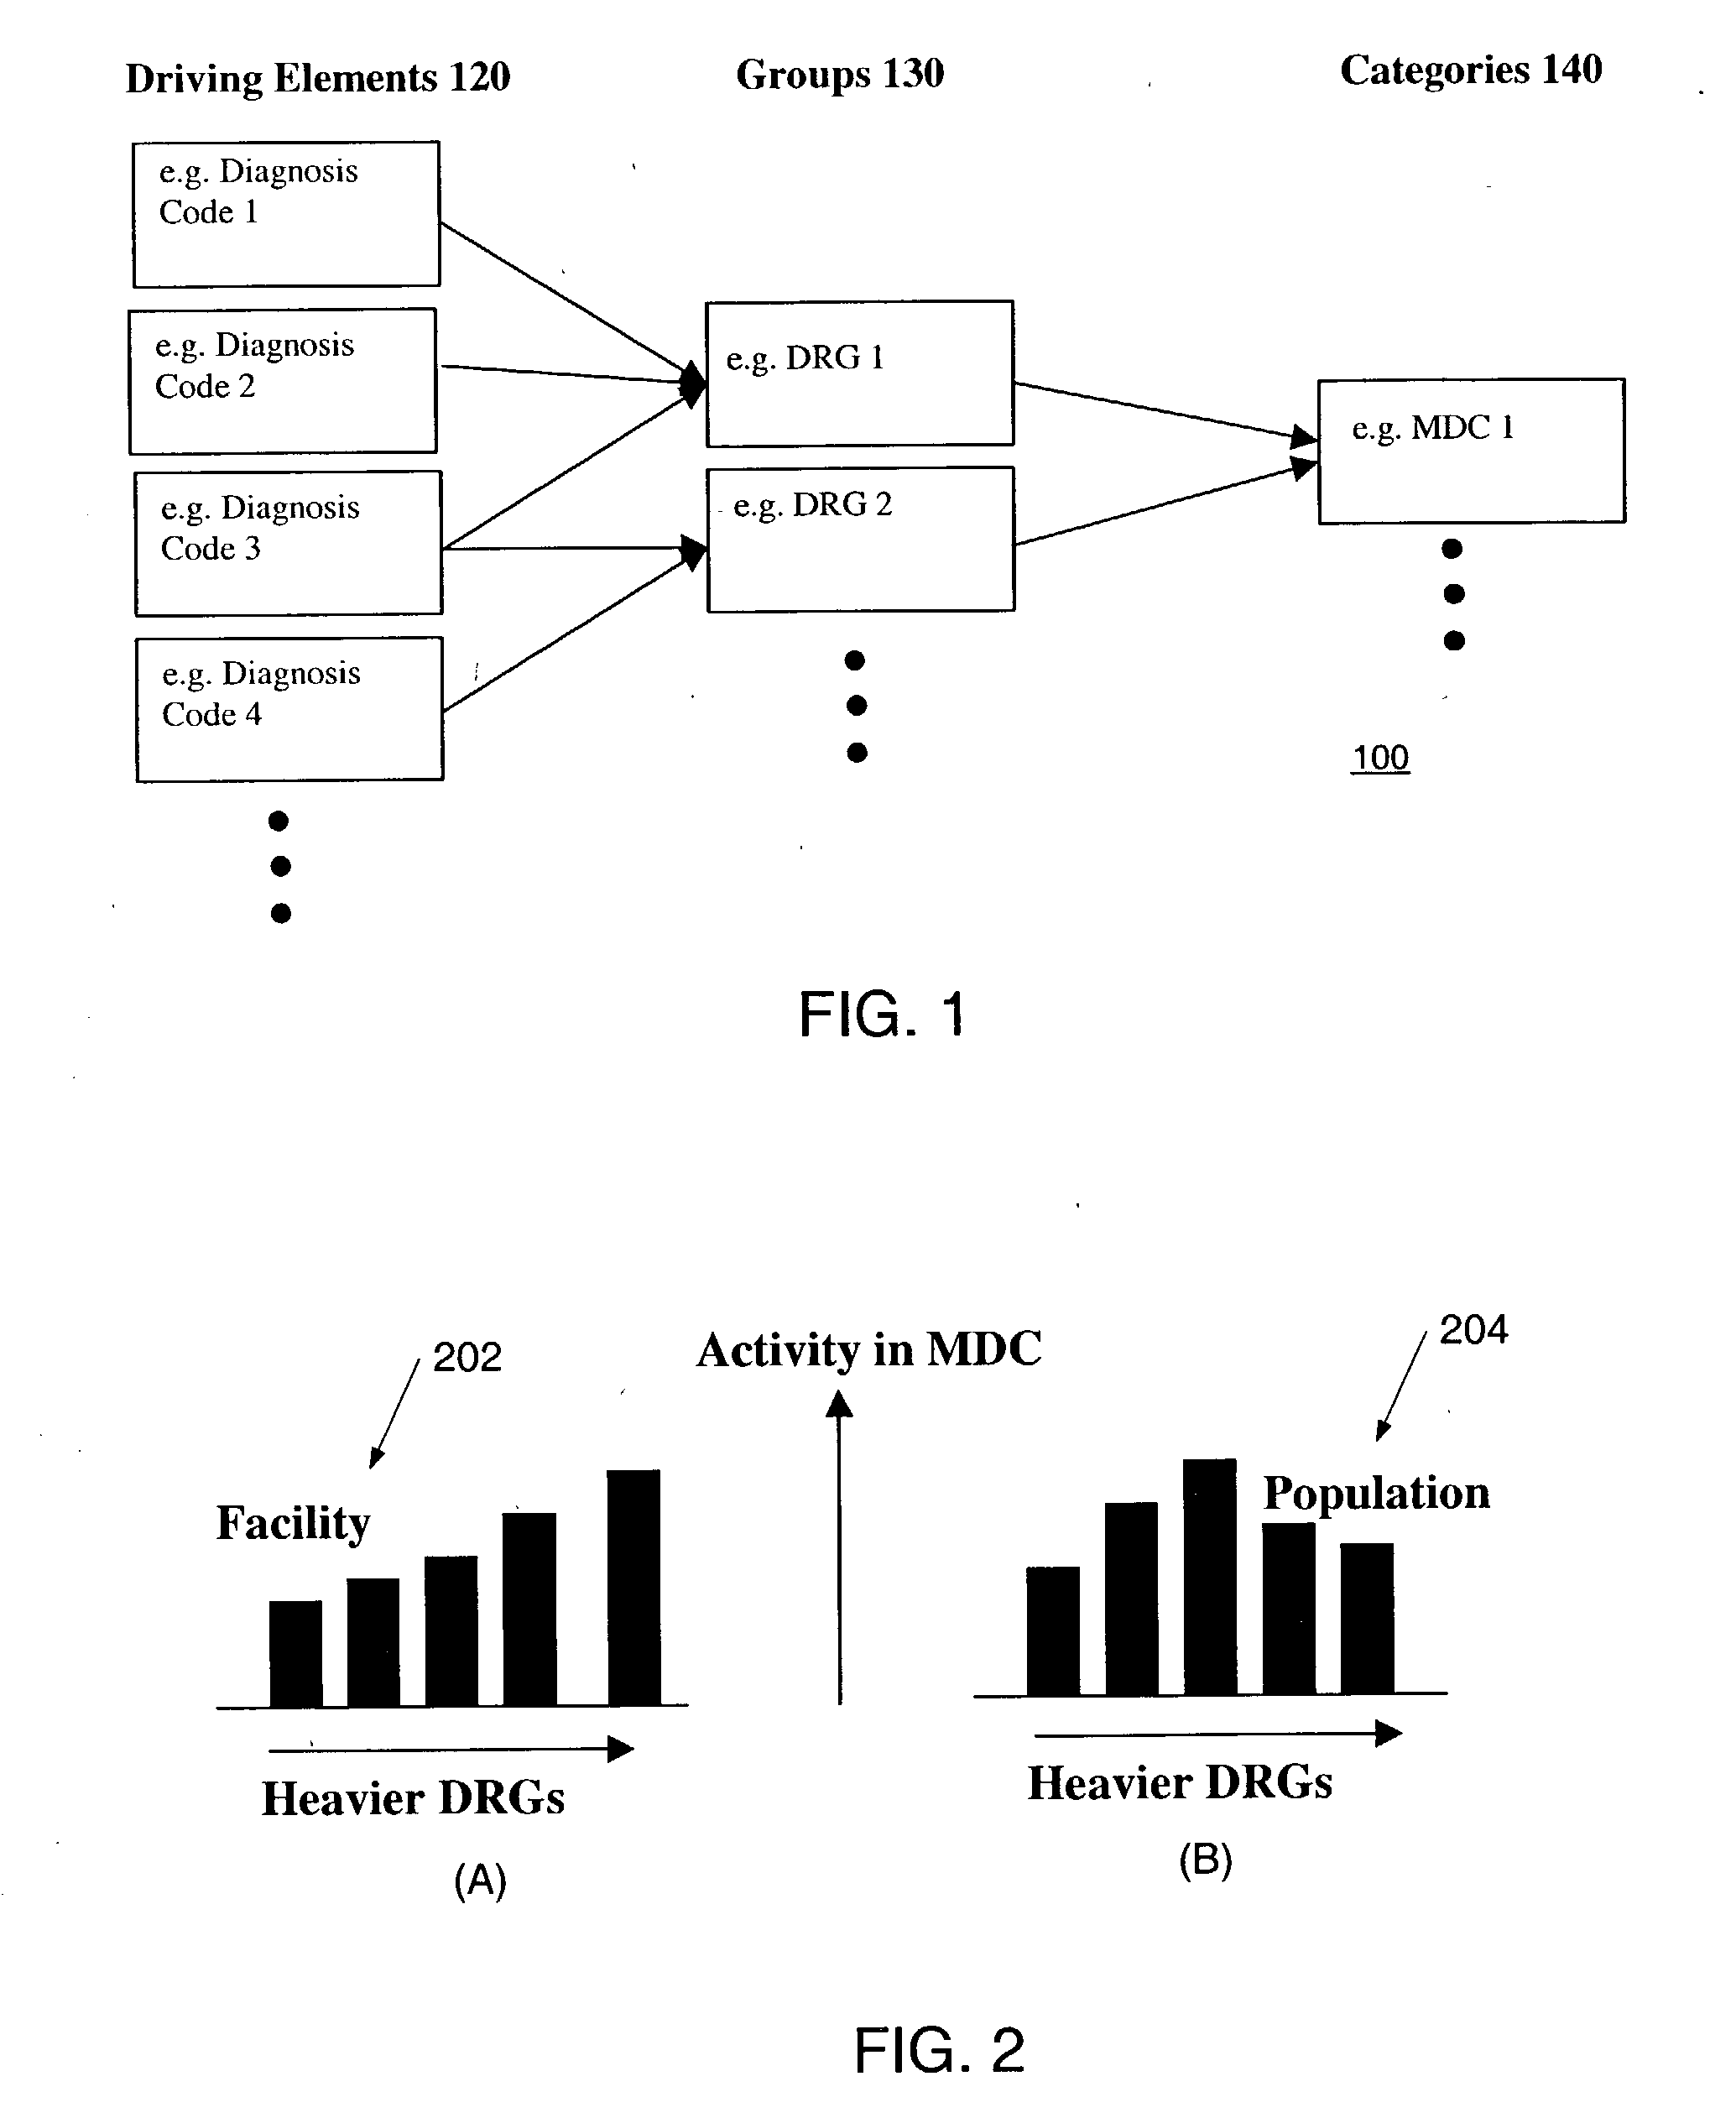 Fraud and abuse detection and entity profiling in hierarchical coded payment systems